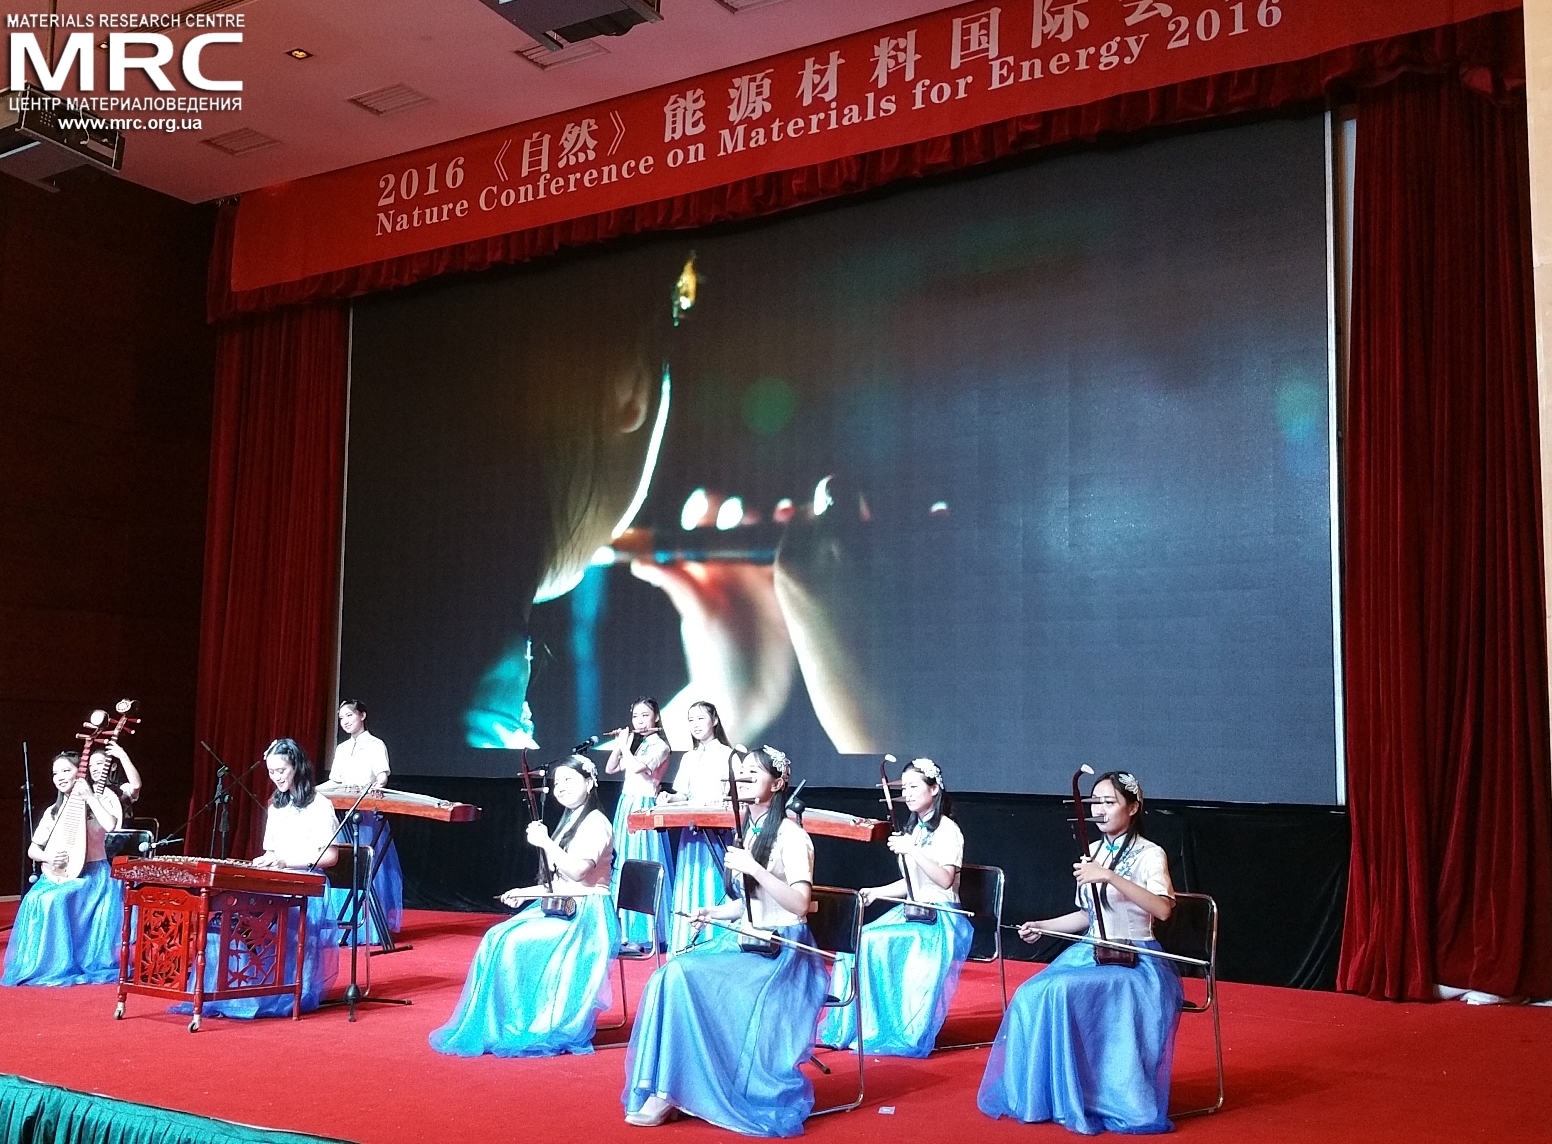 Entertainment at Closing ceremony, Nature Conference on Materials For Energy 2016